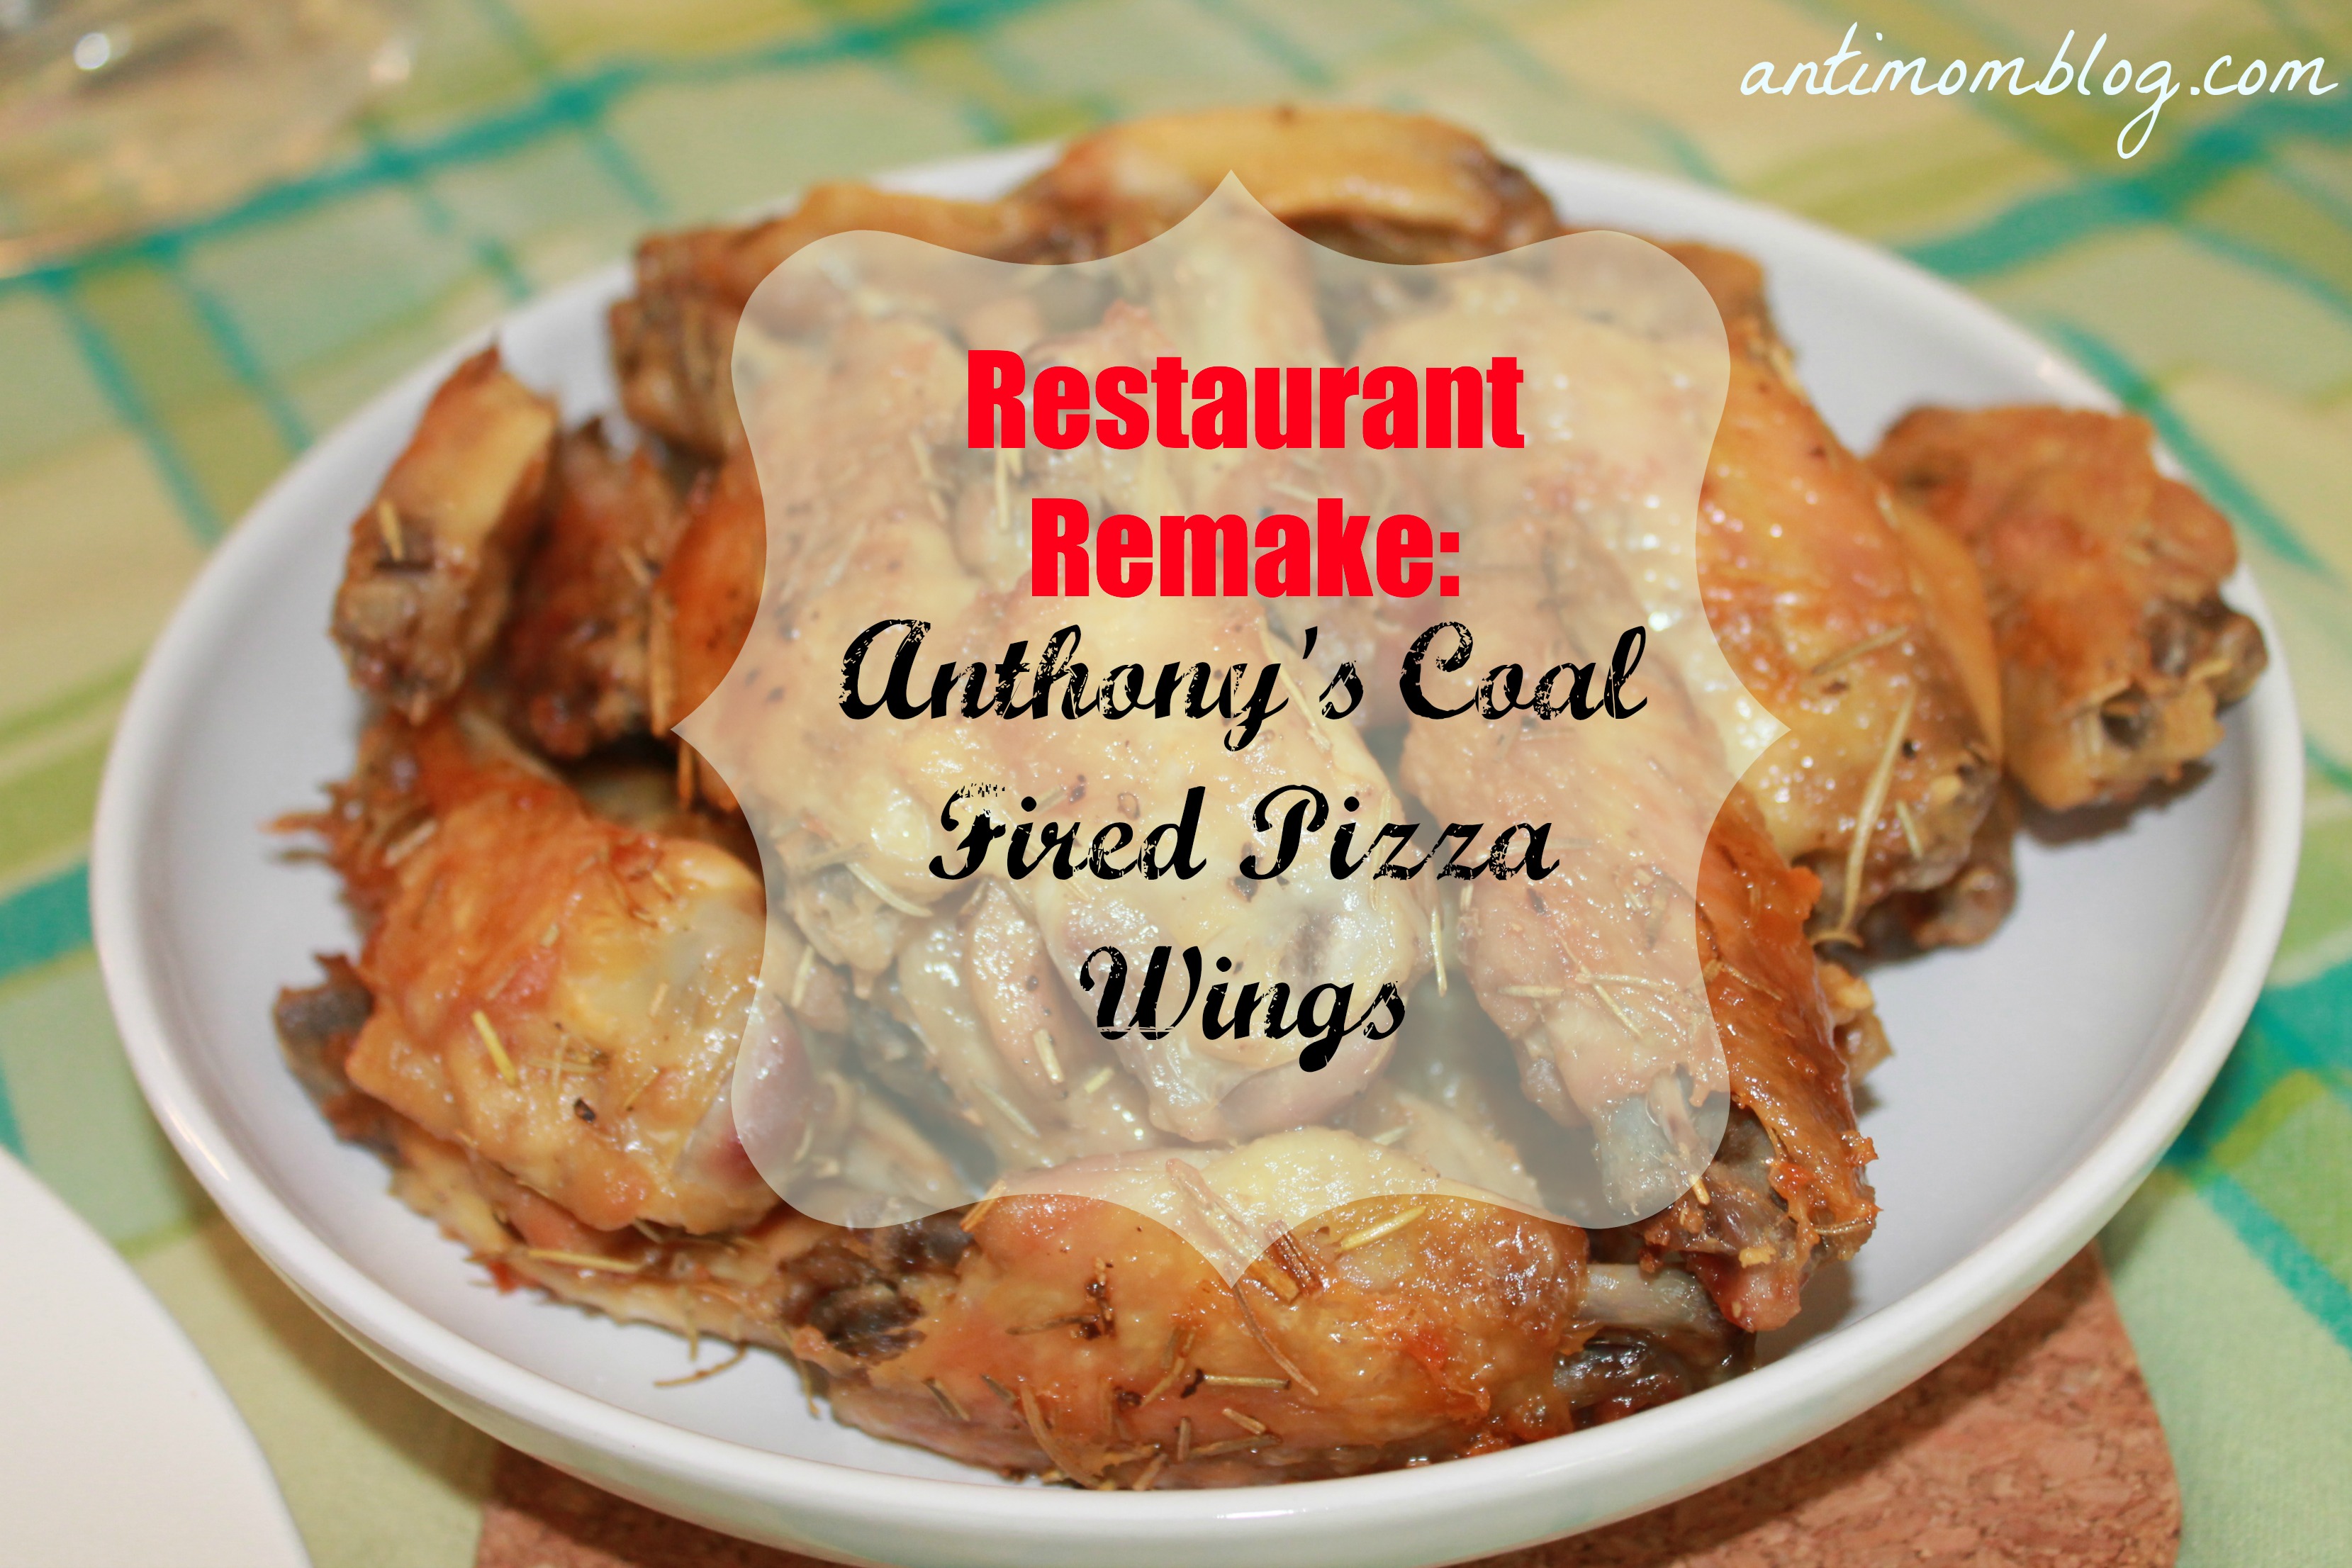 Restaurant Remake: Anthony’s Coal Fired Pizza Wings